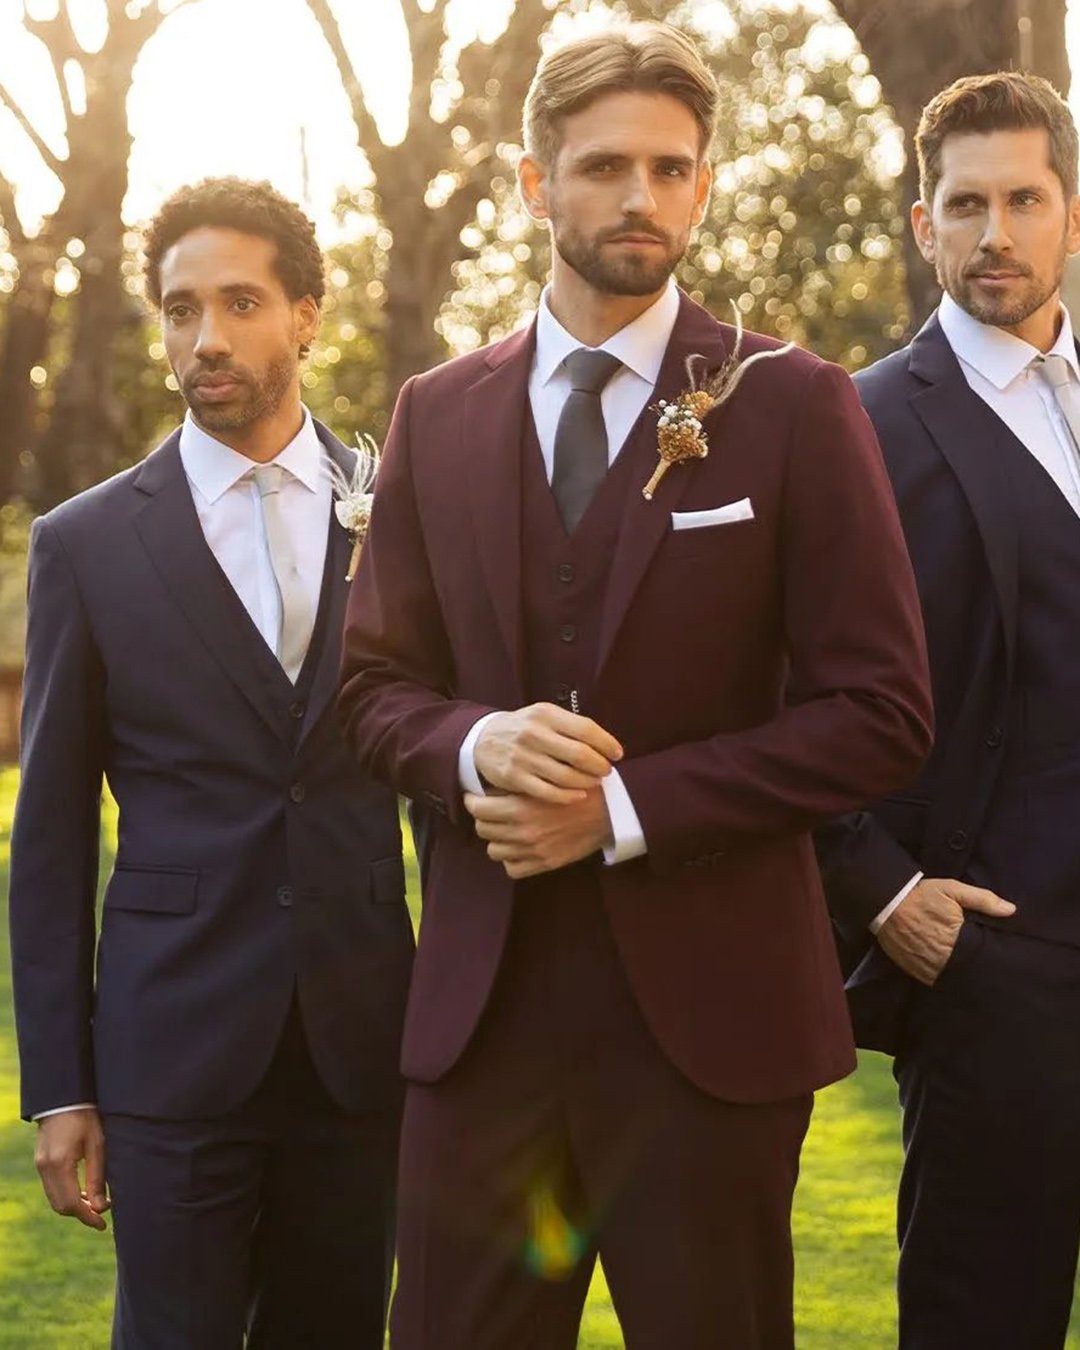 groom suits burgundy jacket with tie boutonniere hockerty men